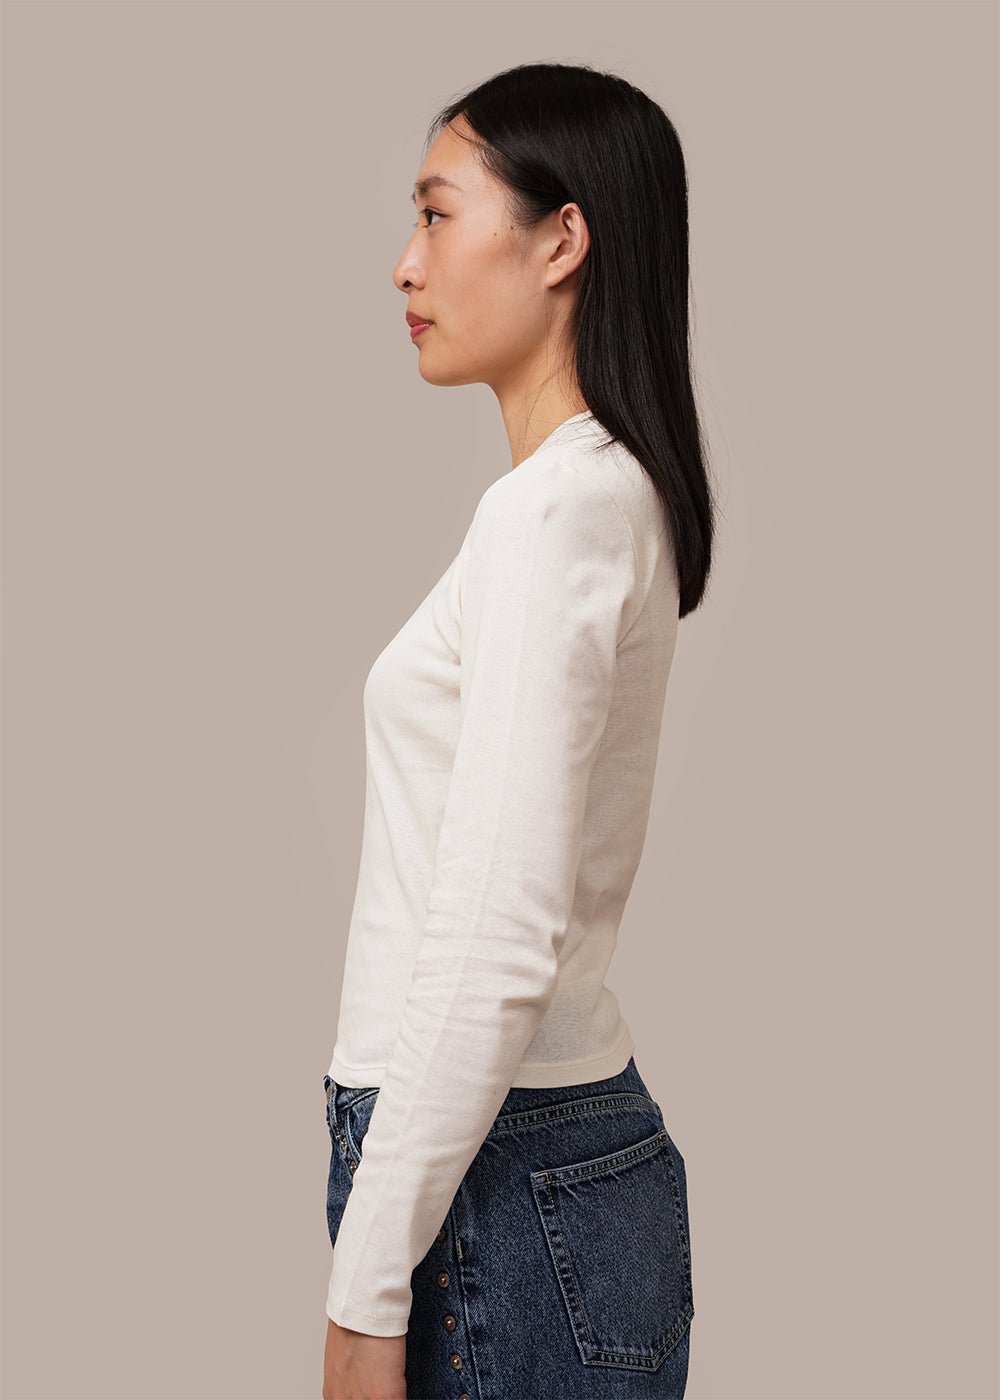 By Signe Off-White Ada Longsleeve Shirt - New Classics Studios Sustainable Ethical Fashion Canada